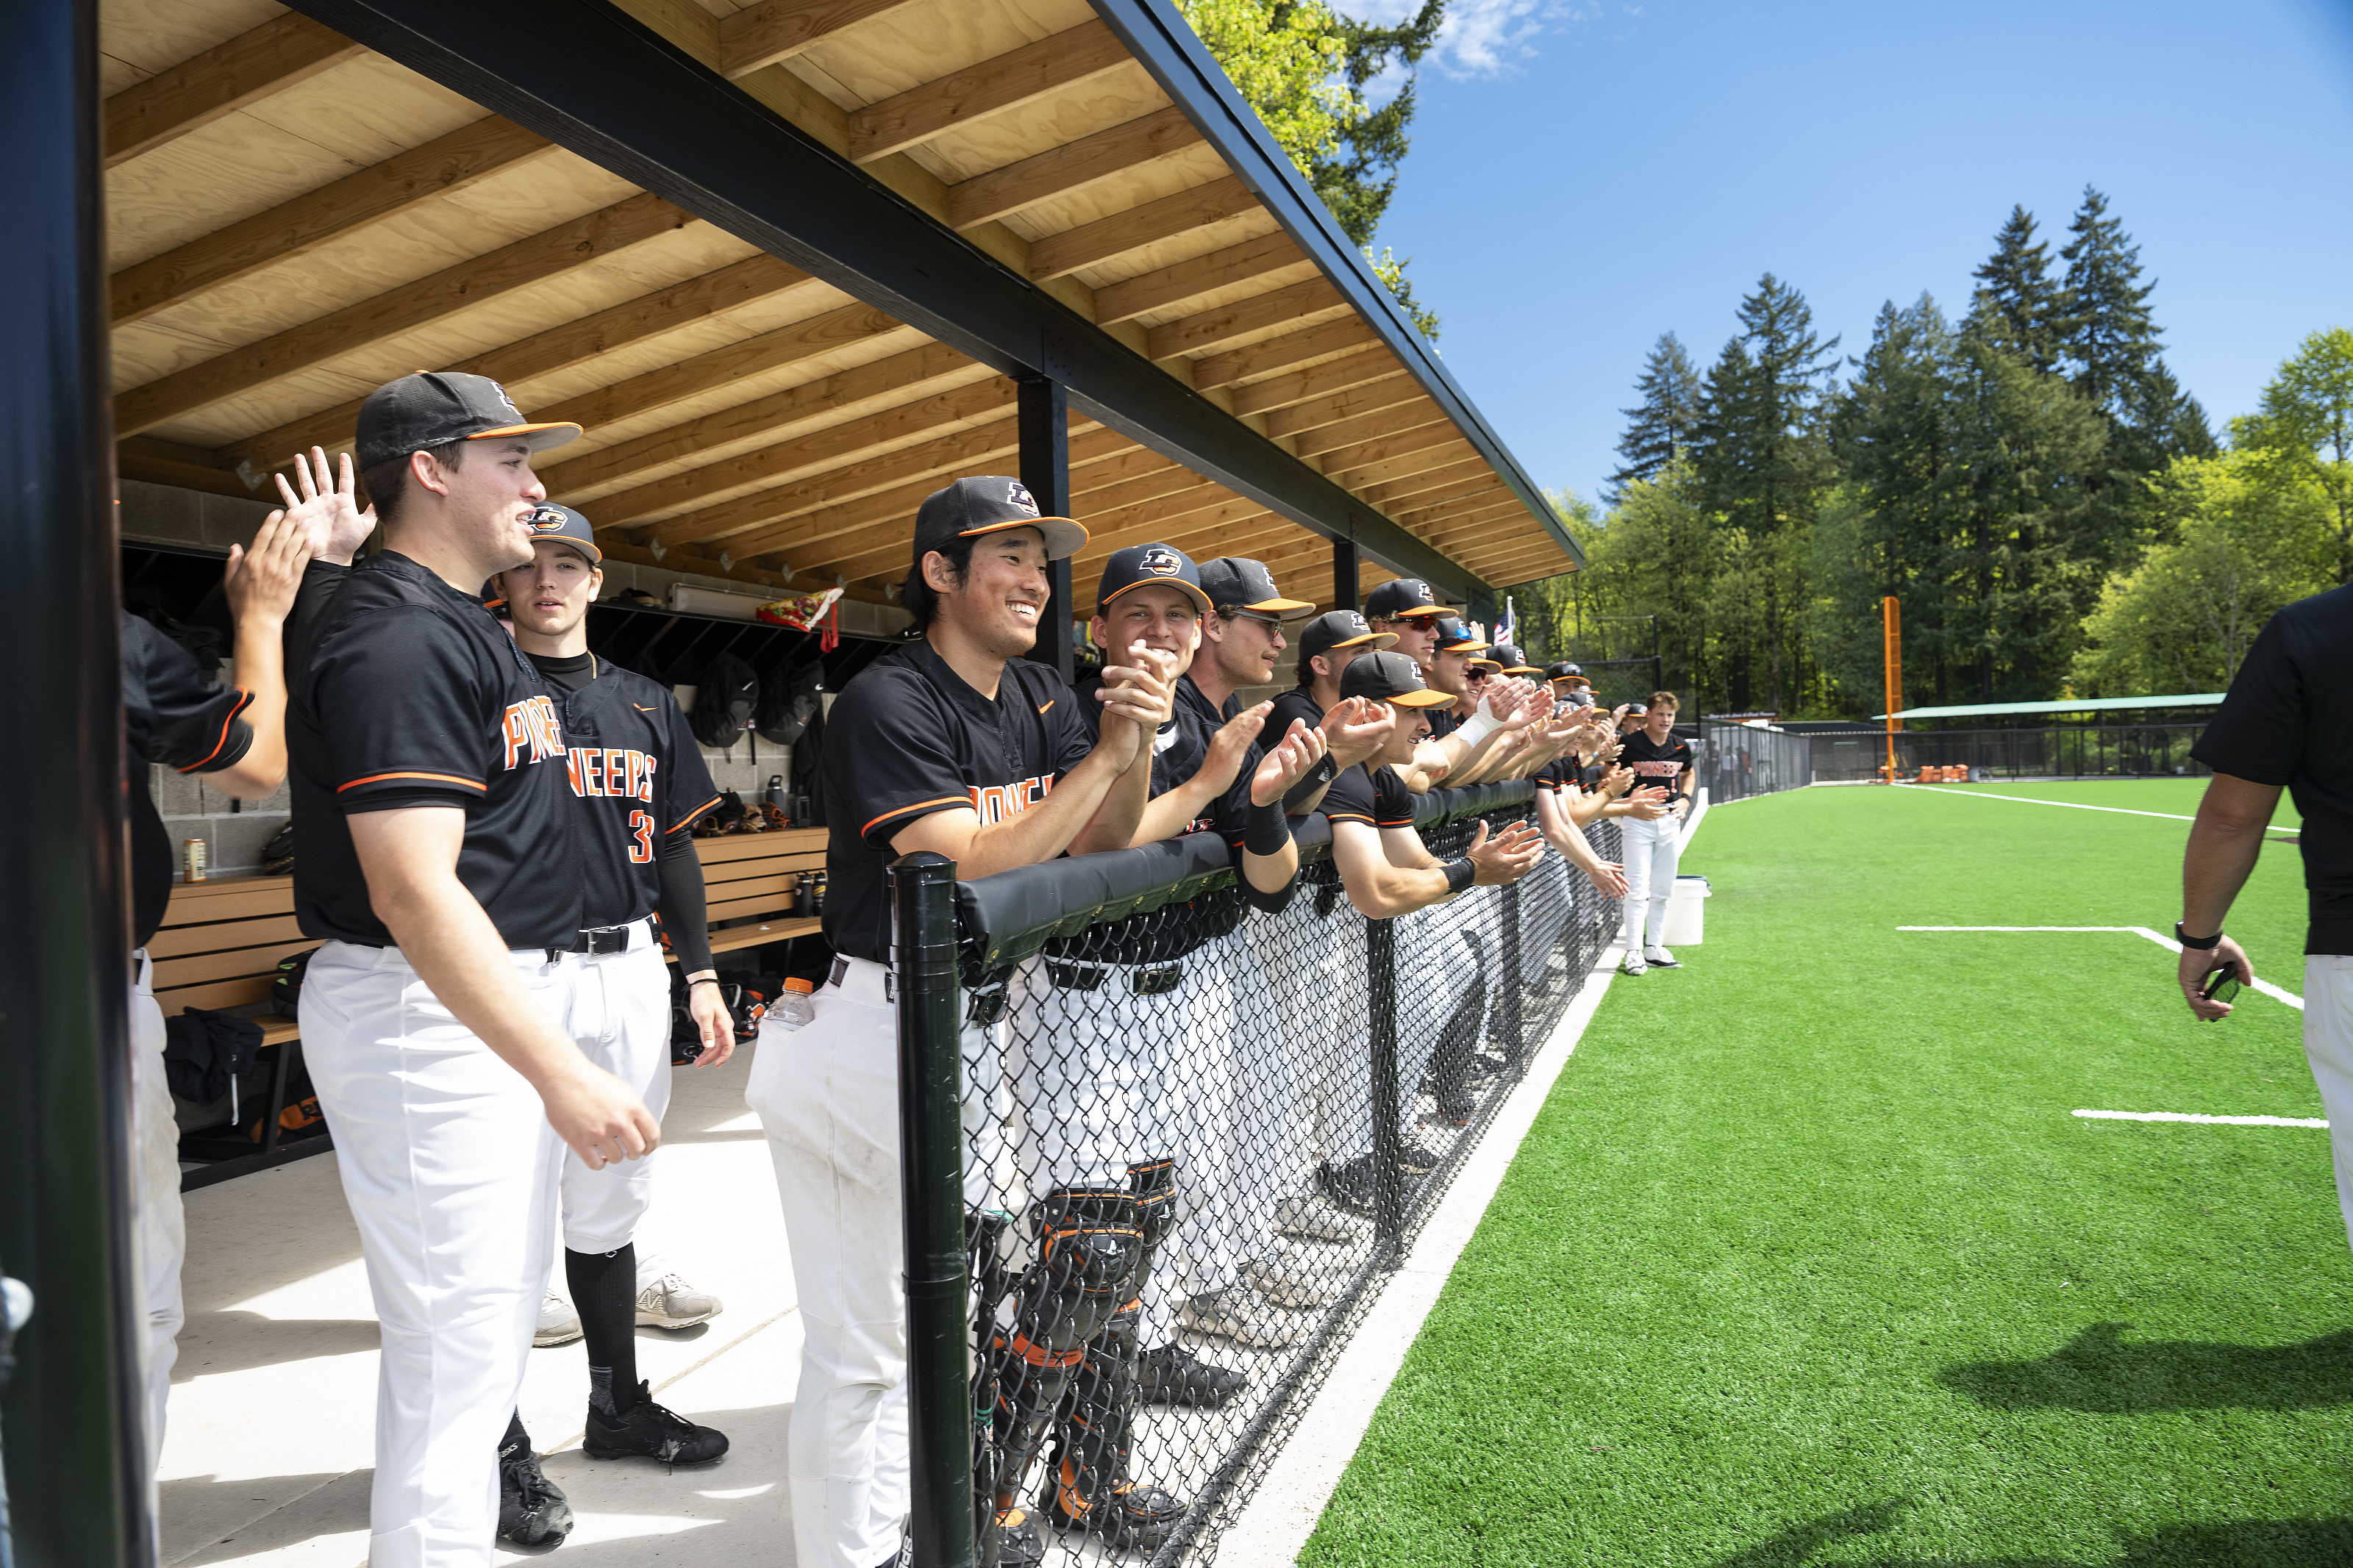 Baseball players standing at the edge of their dugout, watching the game and clapping.